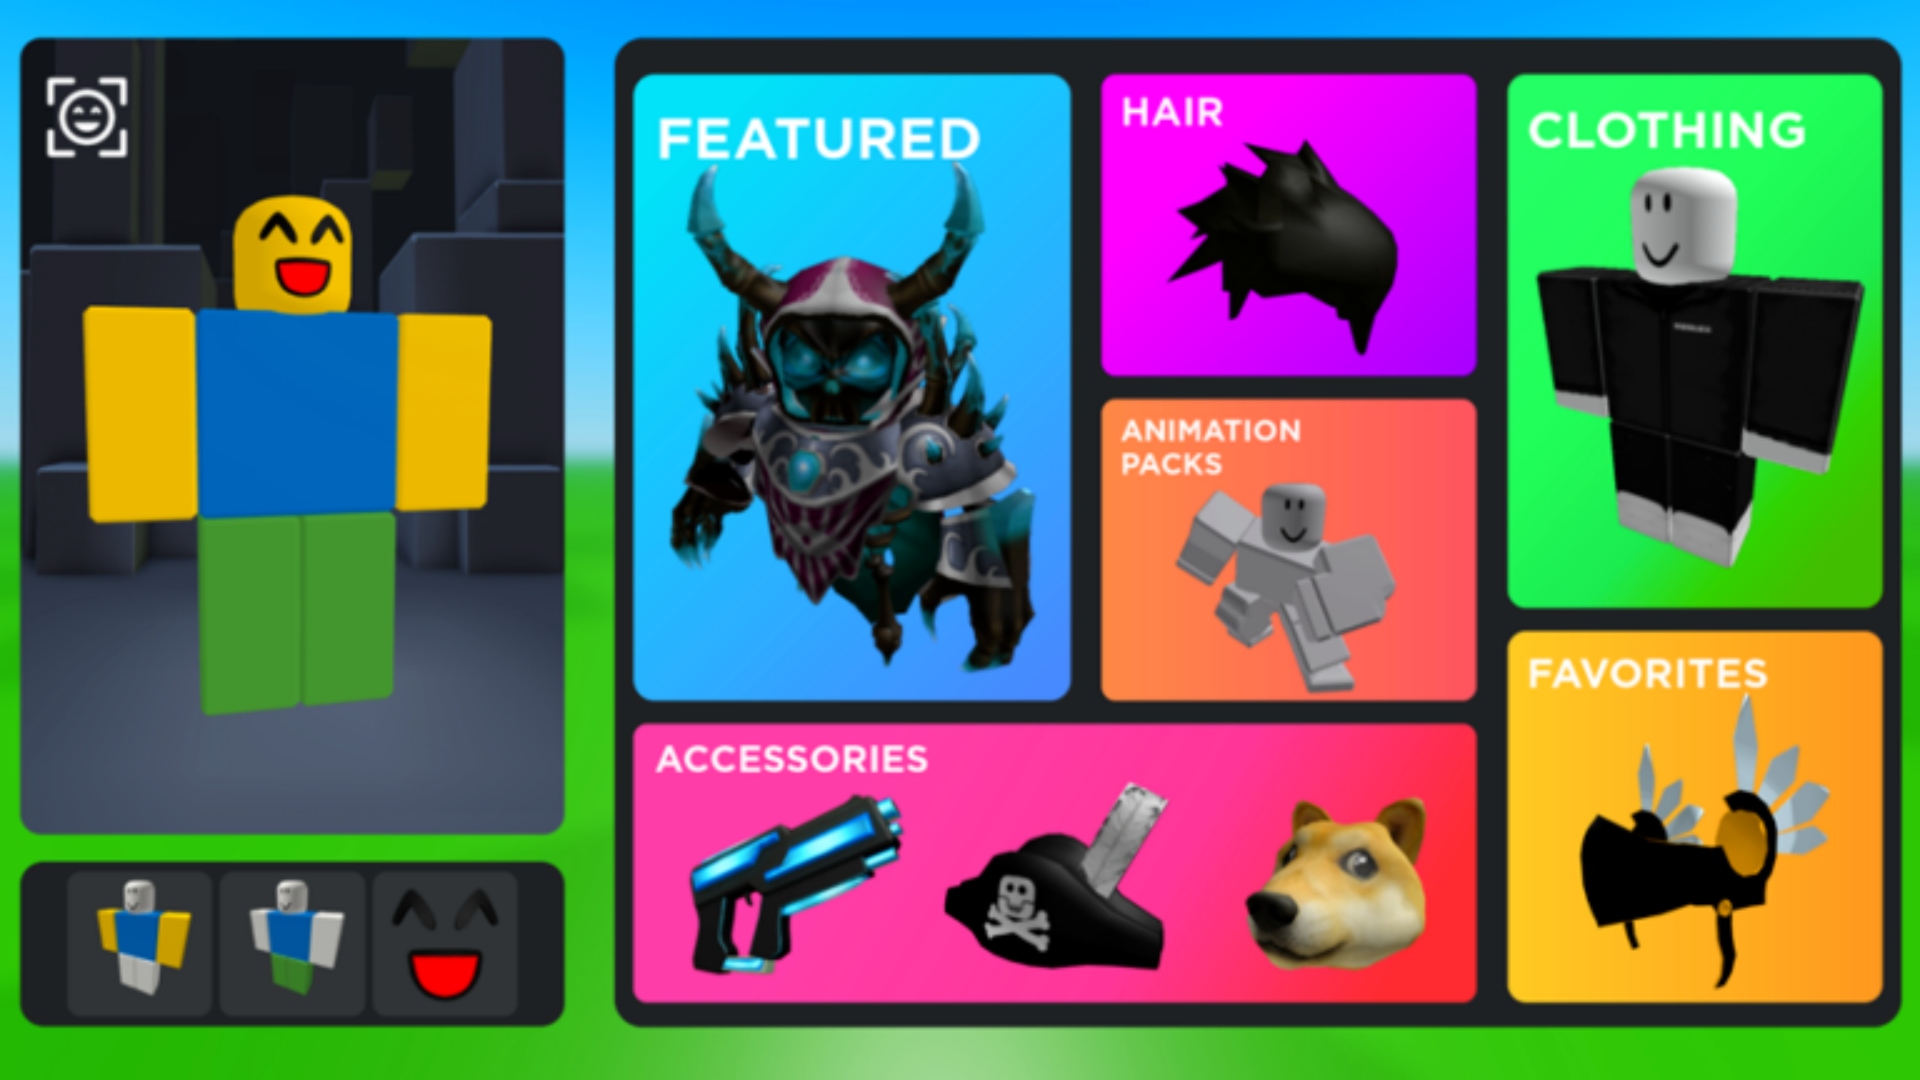 codes for catalog avatar! // #roblox #fitstostealroblox #girlfitroblox, fits